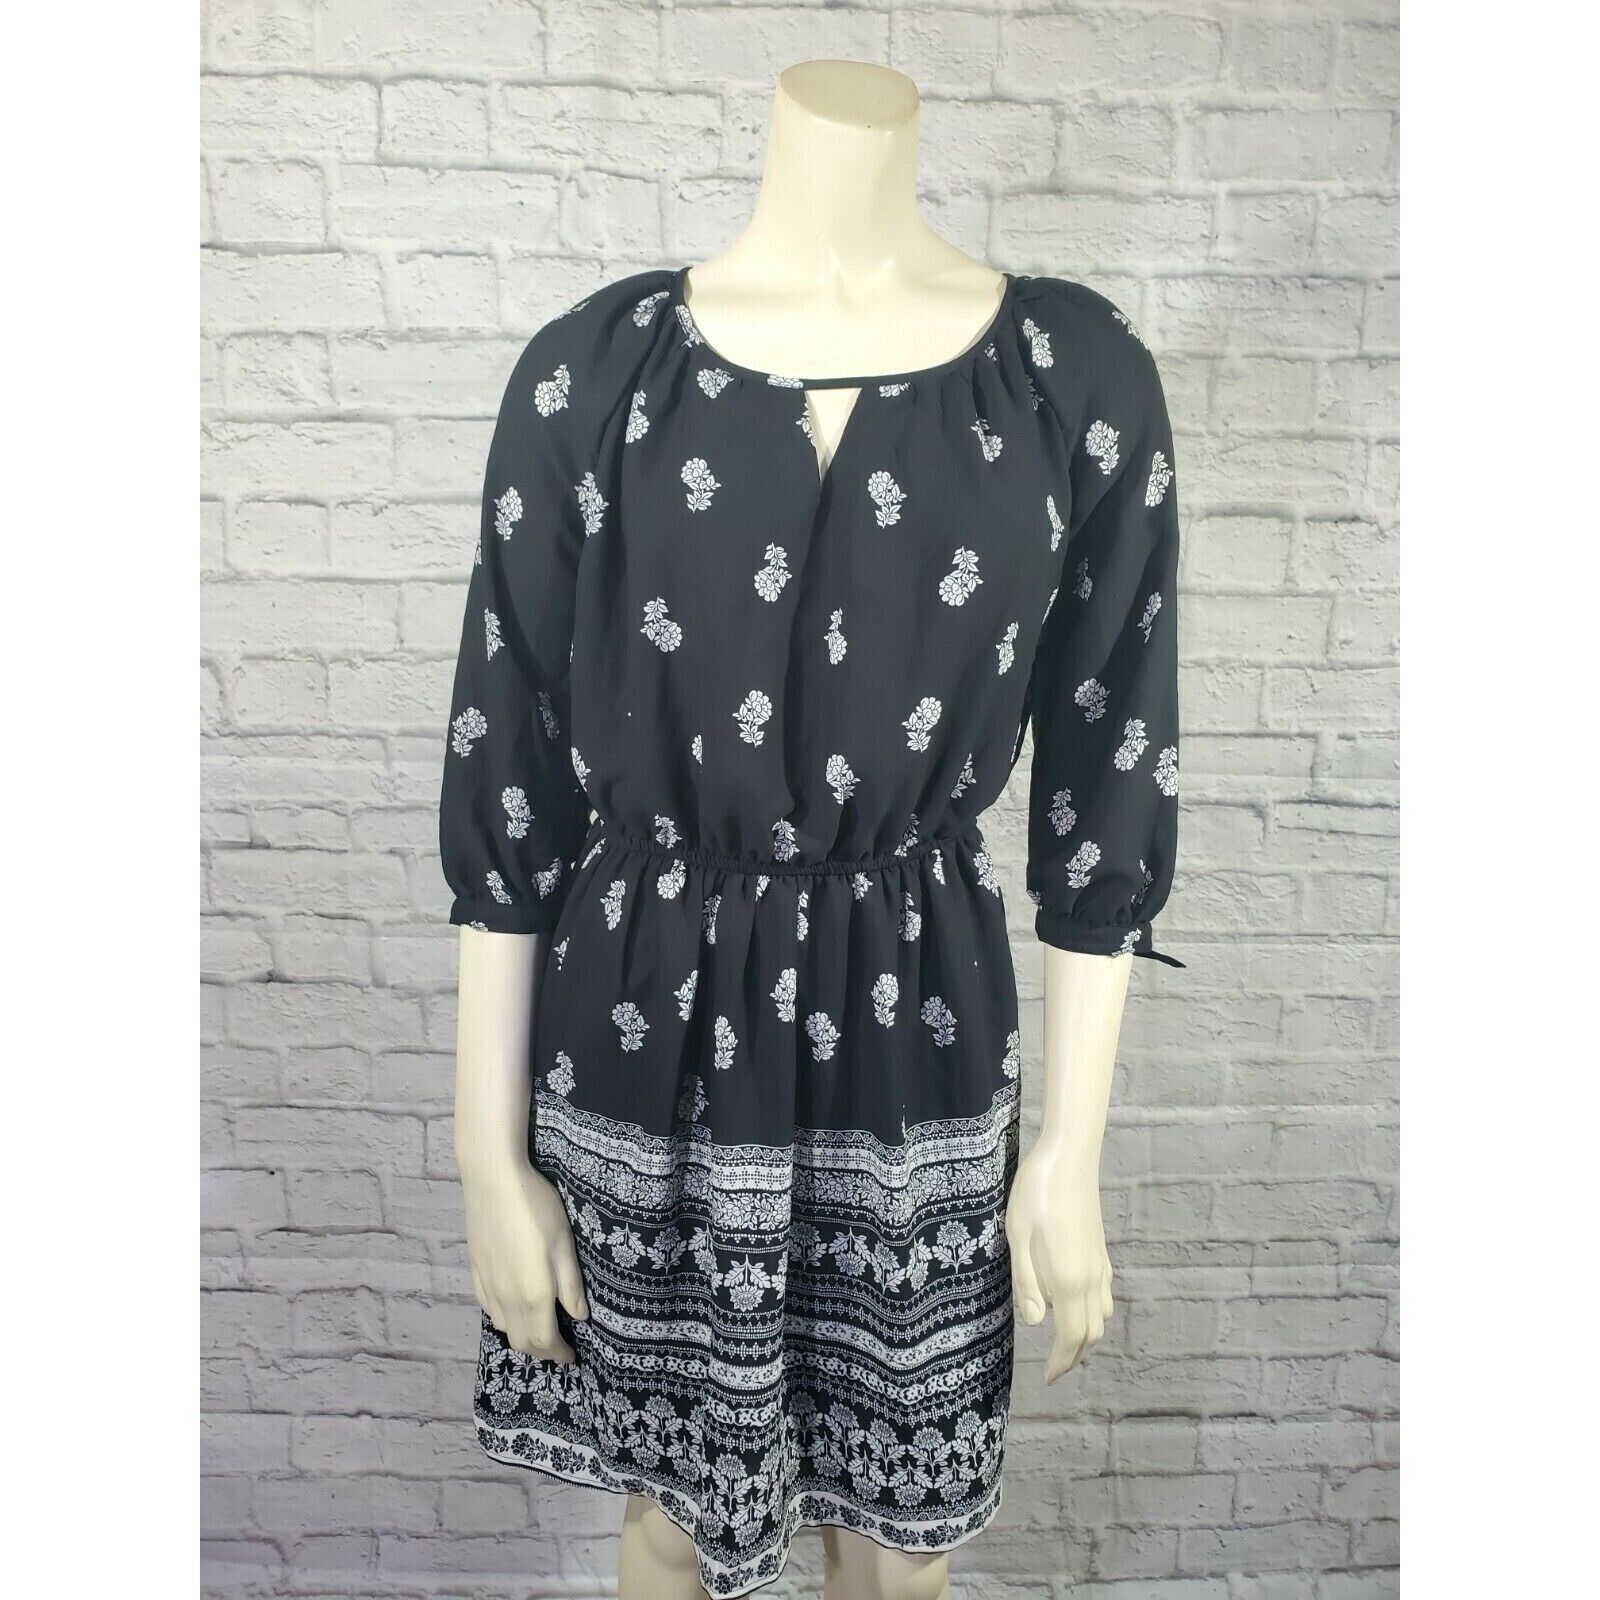 Primary image for Maurices Dress Size S Womens Black White Floral 3/4 Sleeve Keyhole Neck Midi